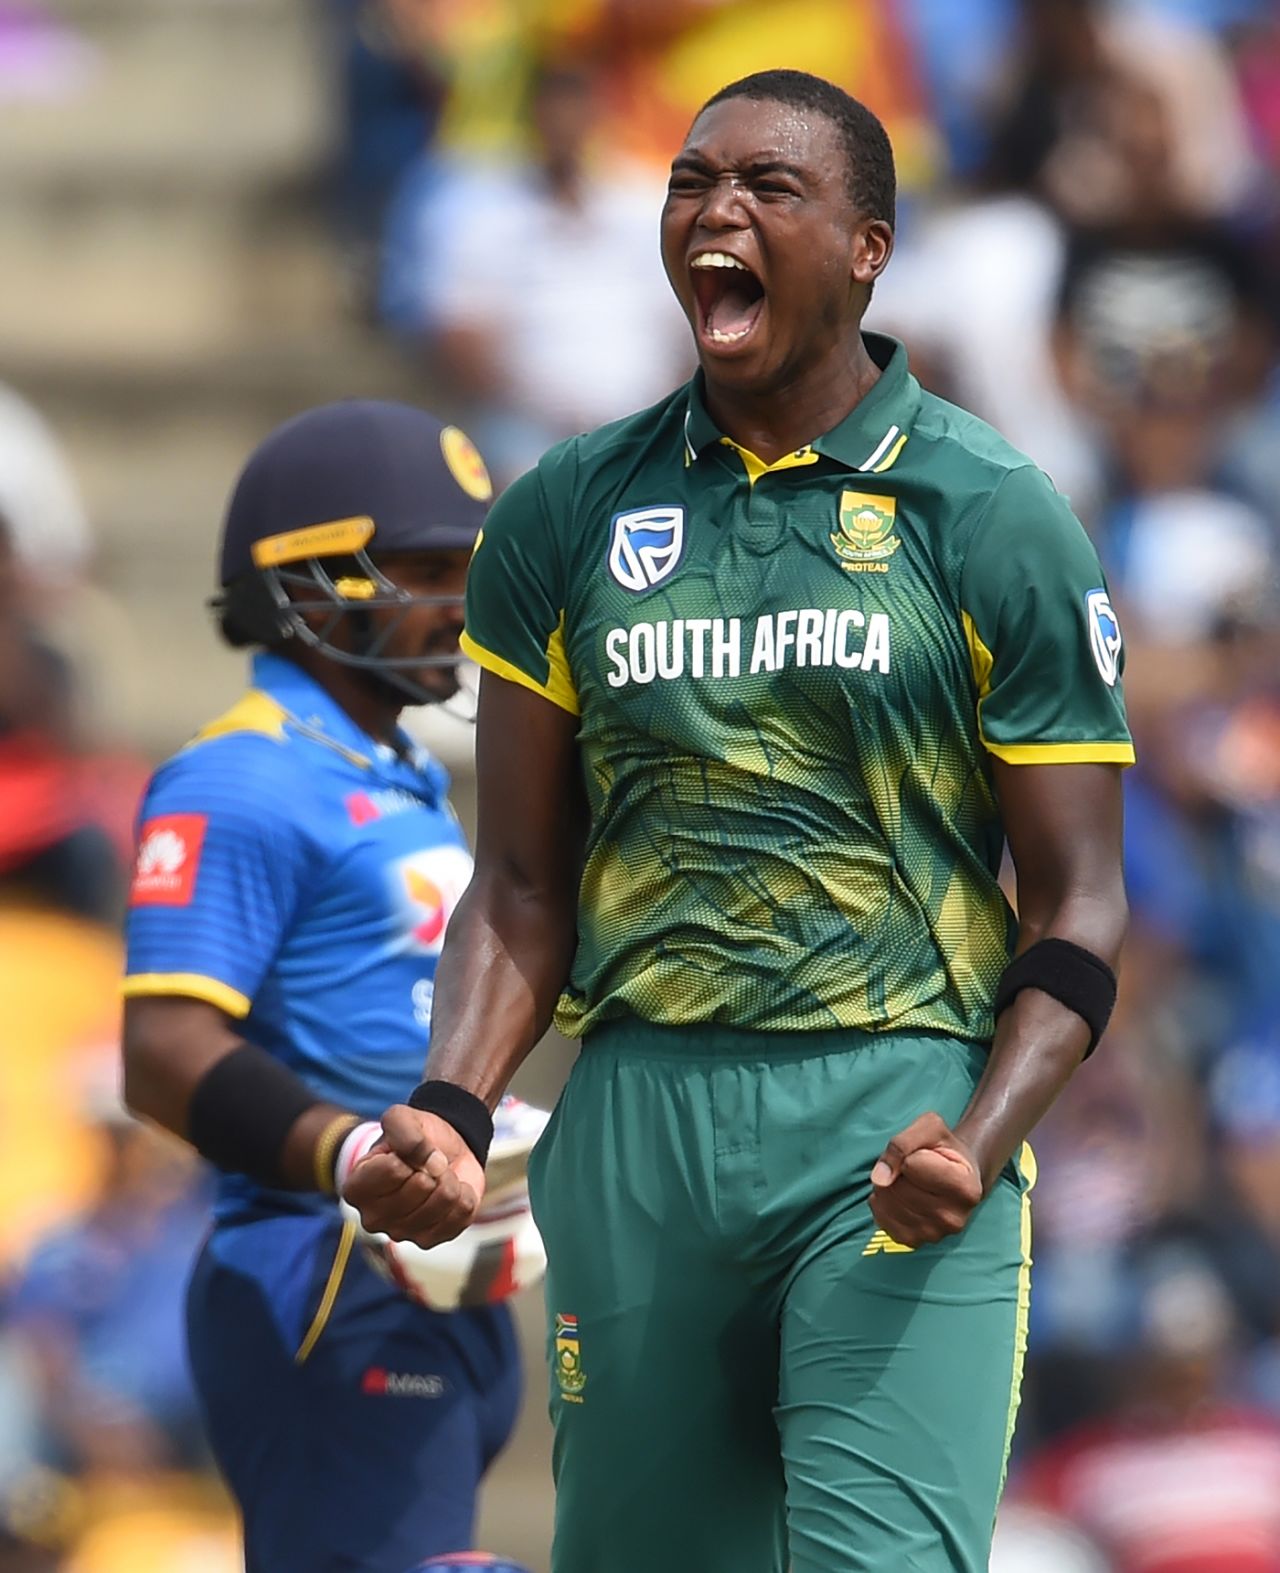 Lungi Ngidi is delighted after picking up an early wicket, Sri Lanka v South Africa, 3rd ODI, Pallekele, August 5, 2018